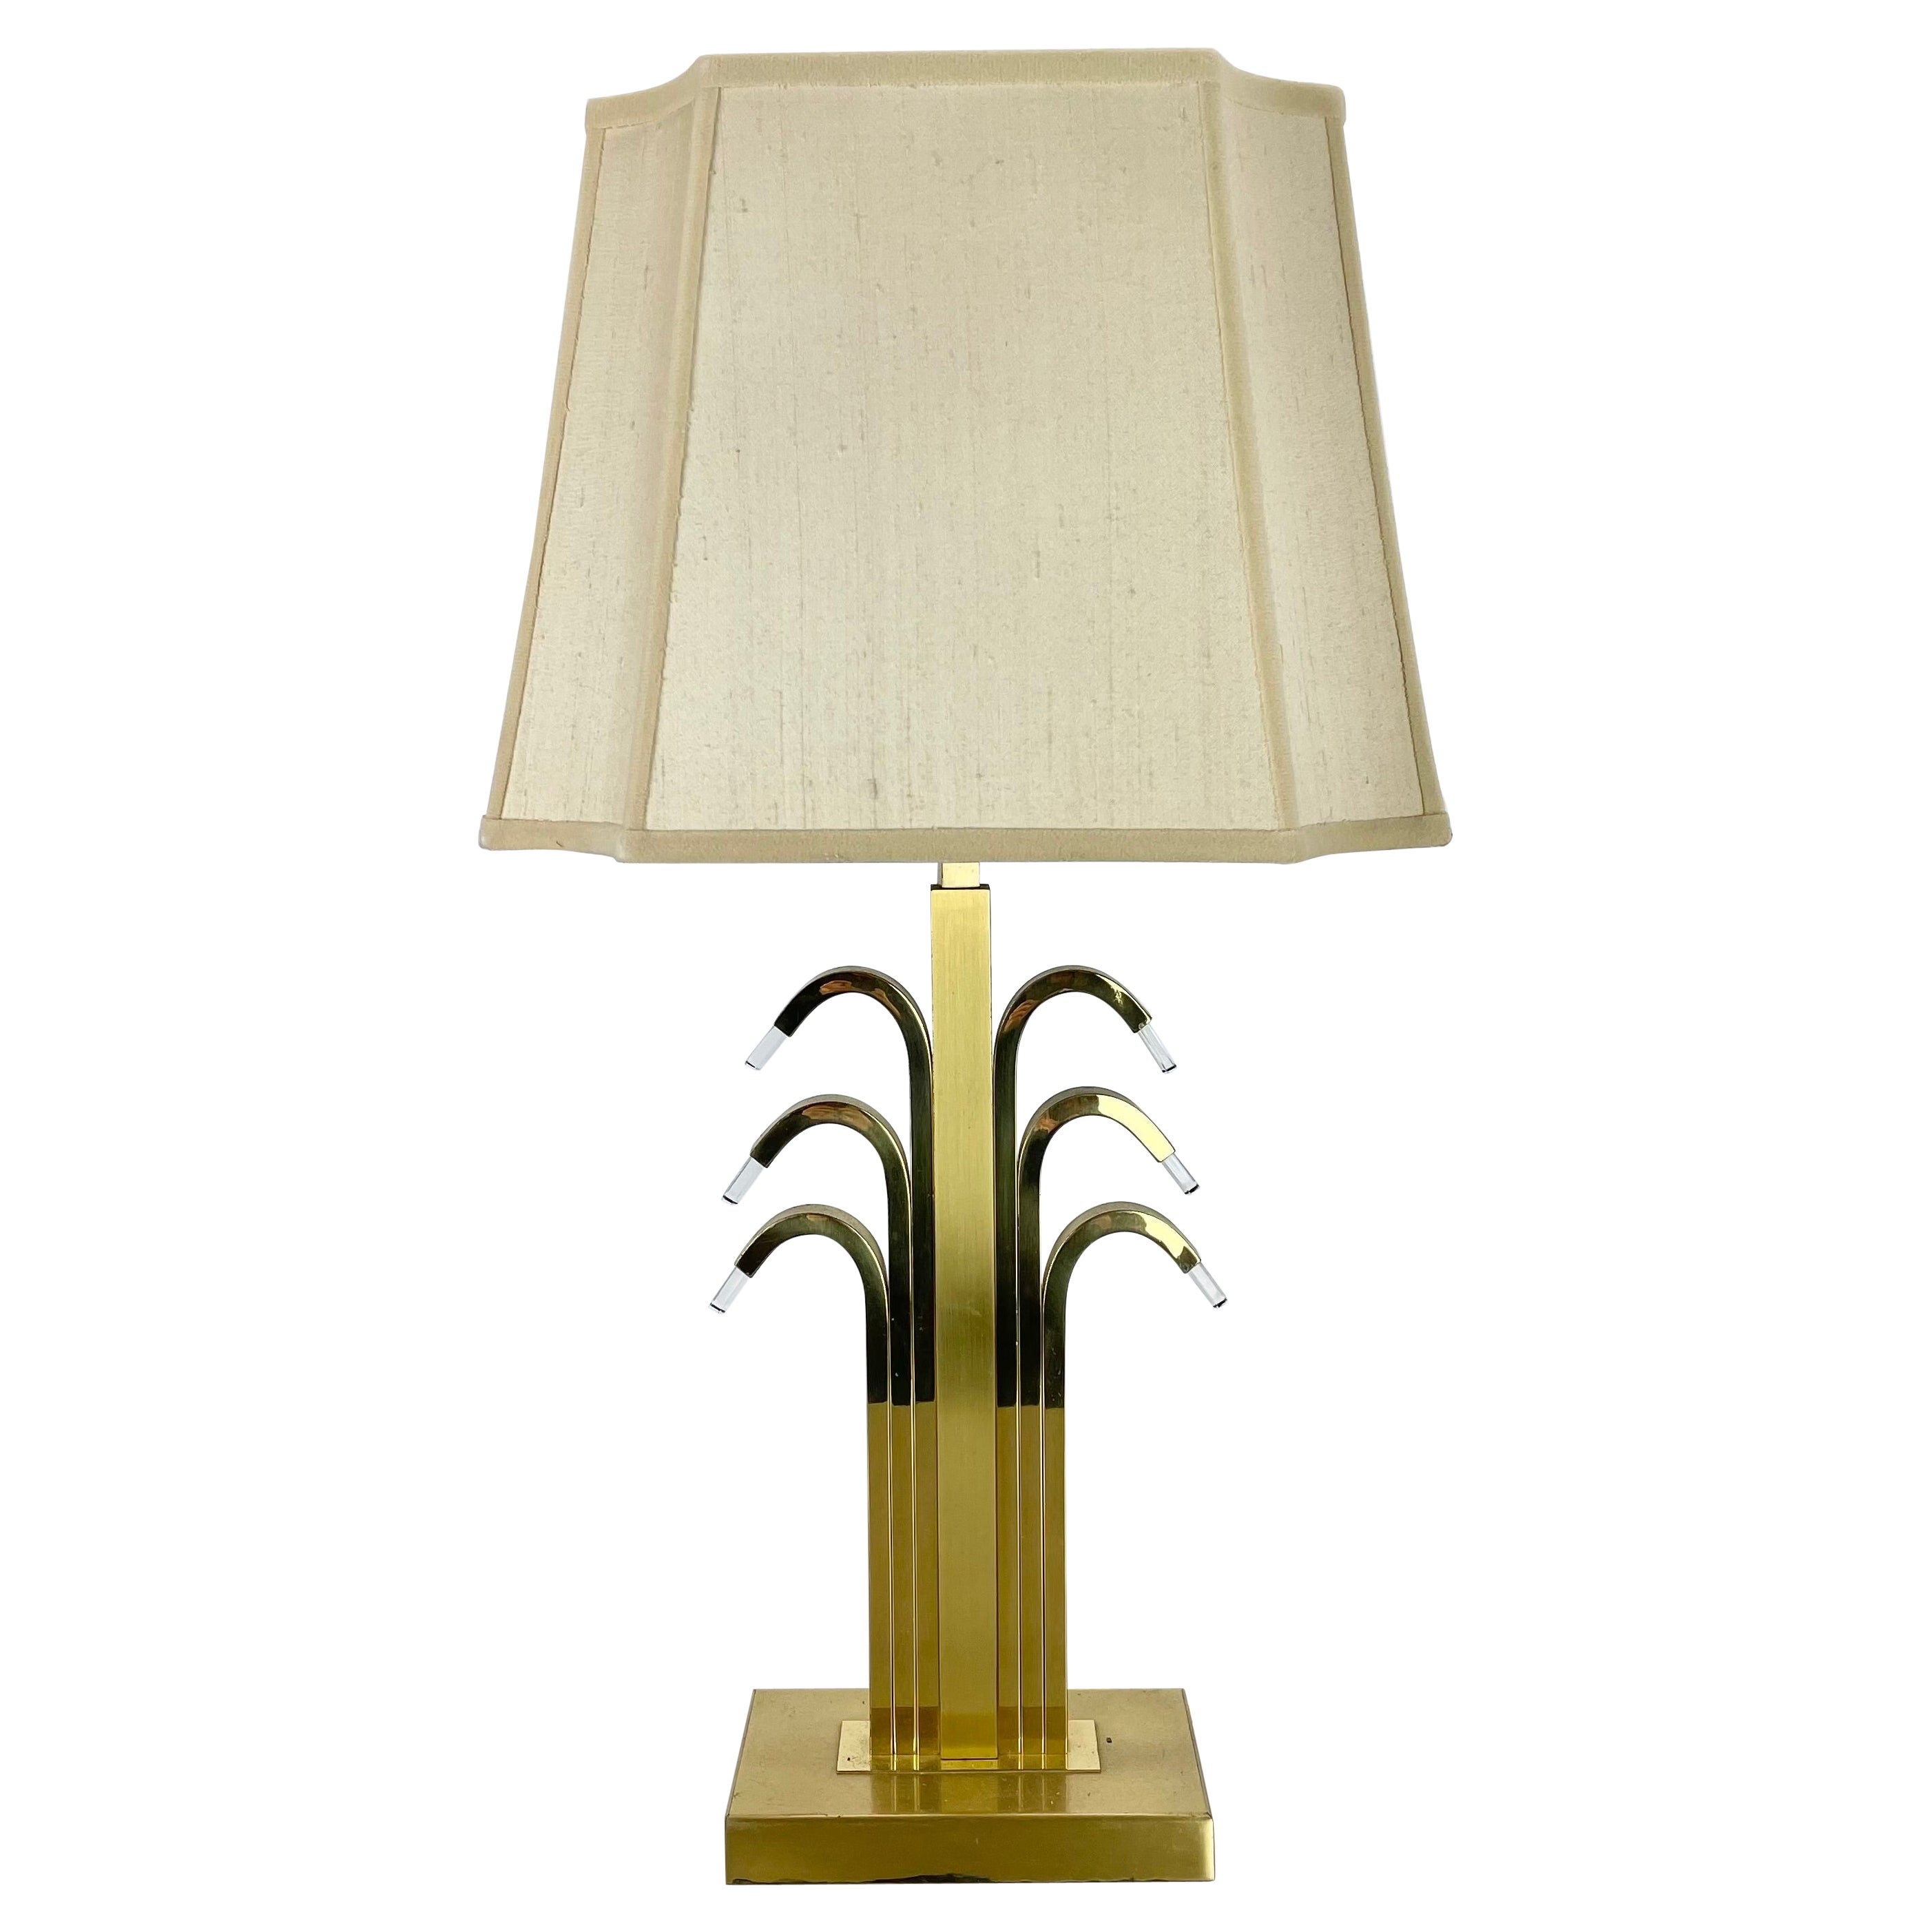 Hollywood Regency Style Brass and Acryl Table Light by WKR Lights, Germany 1970s For Sale